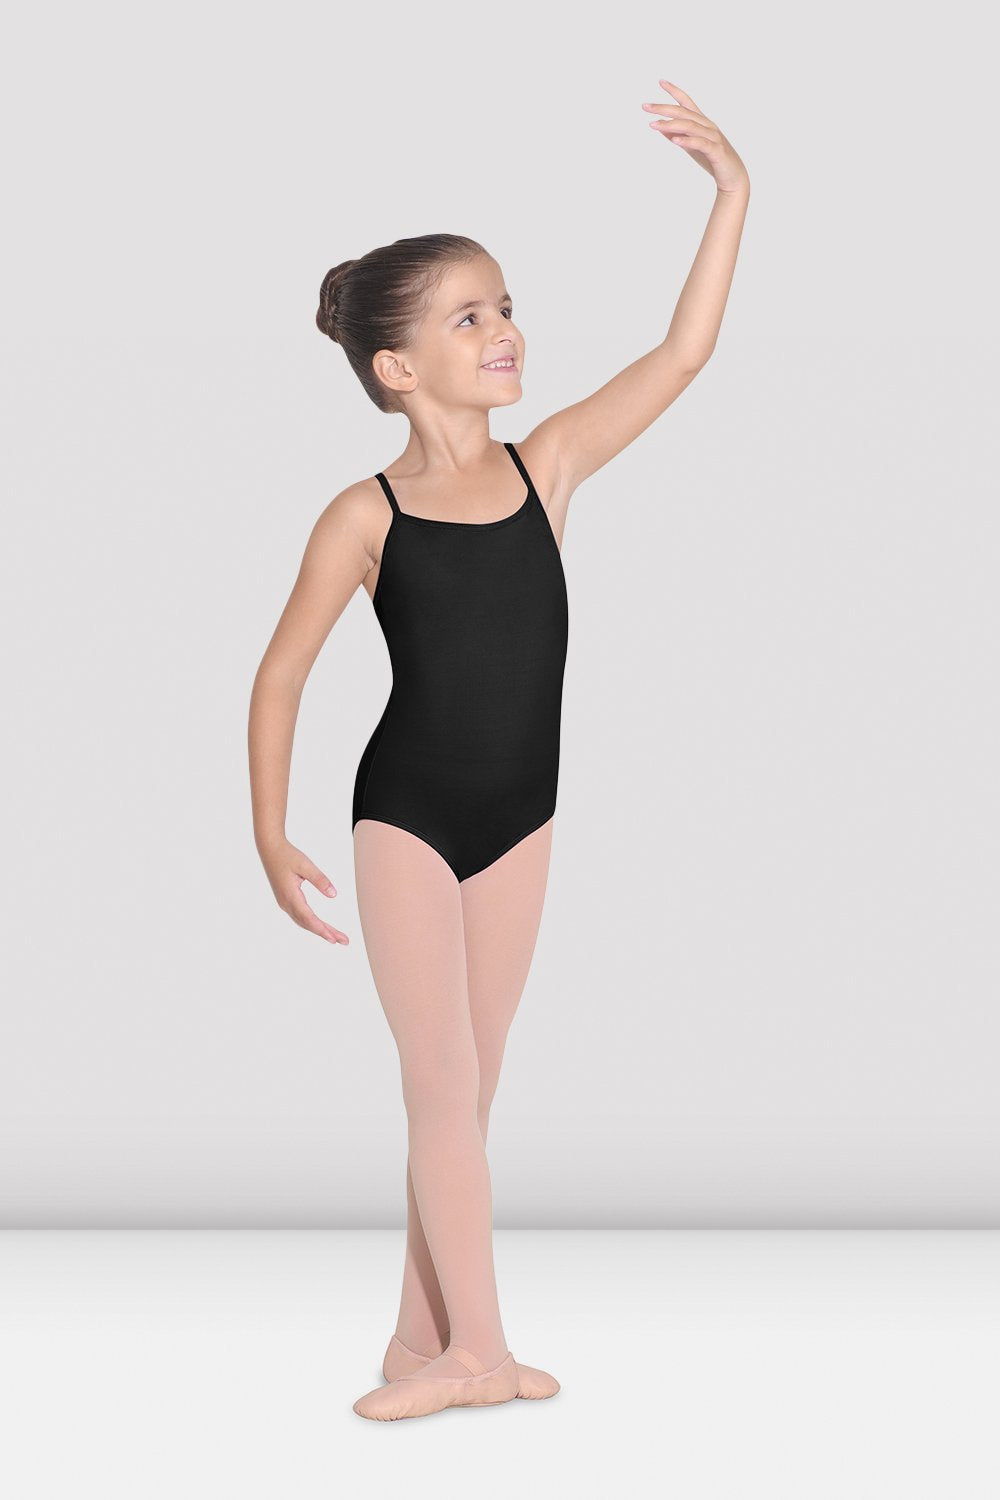 Best Dance Clothes, Dancewear From Leotards To Leggings